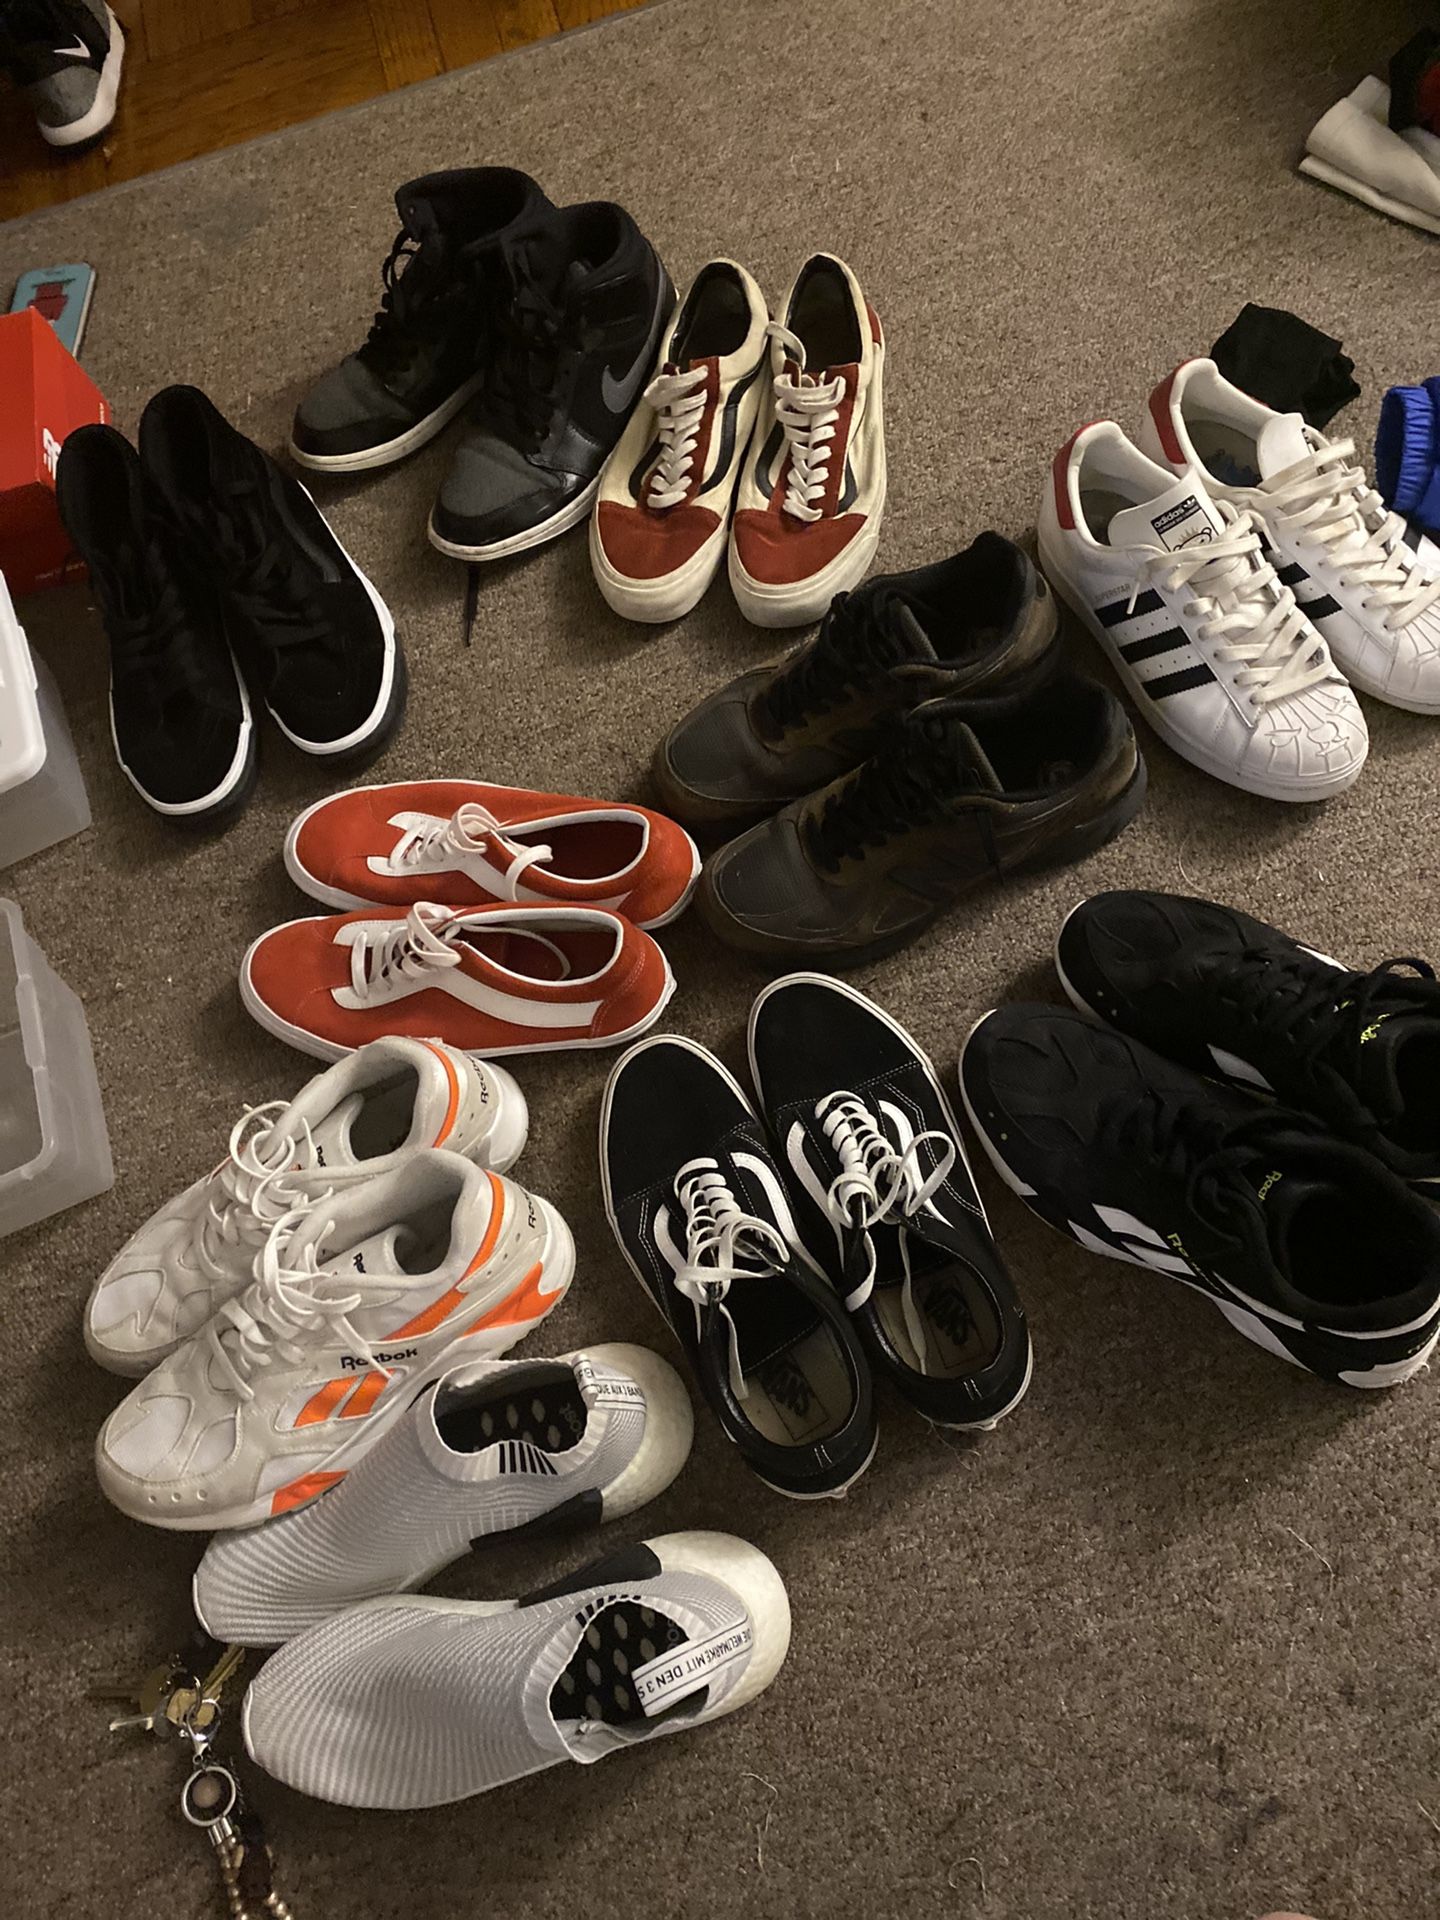 All MEN size 10.5 !!!! For sale Reebok, adidas, Fila,Vans, New Balance and Nike’s.